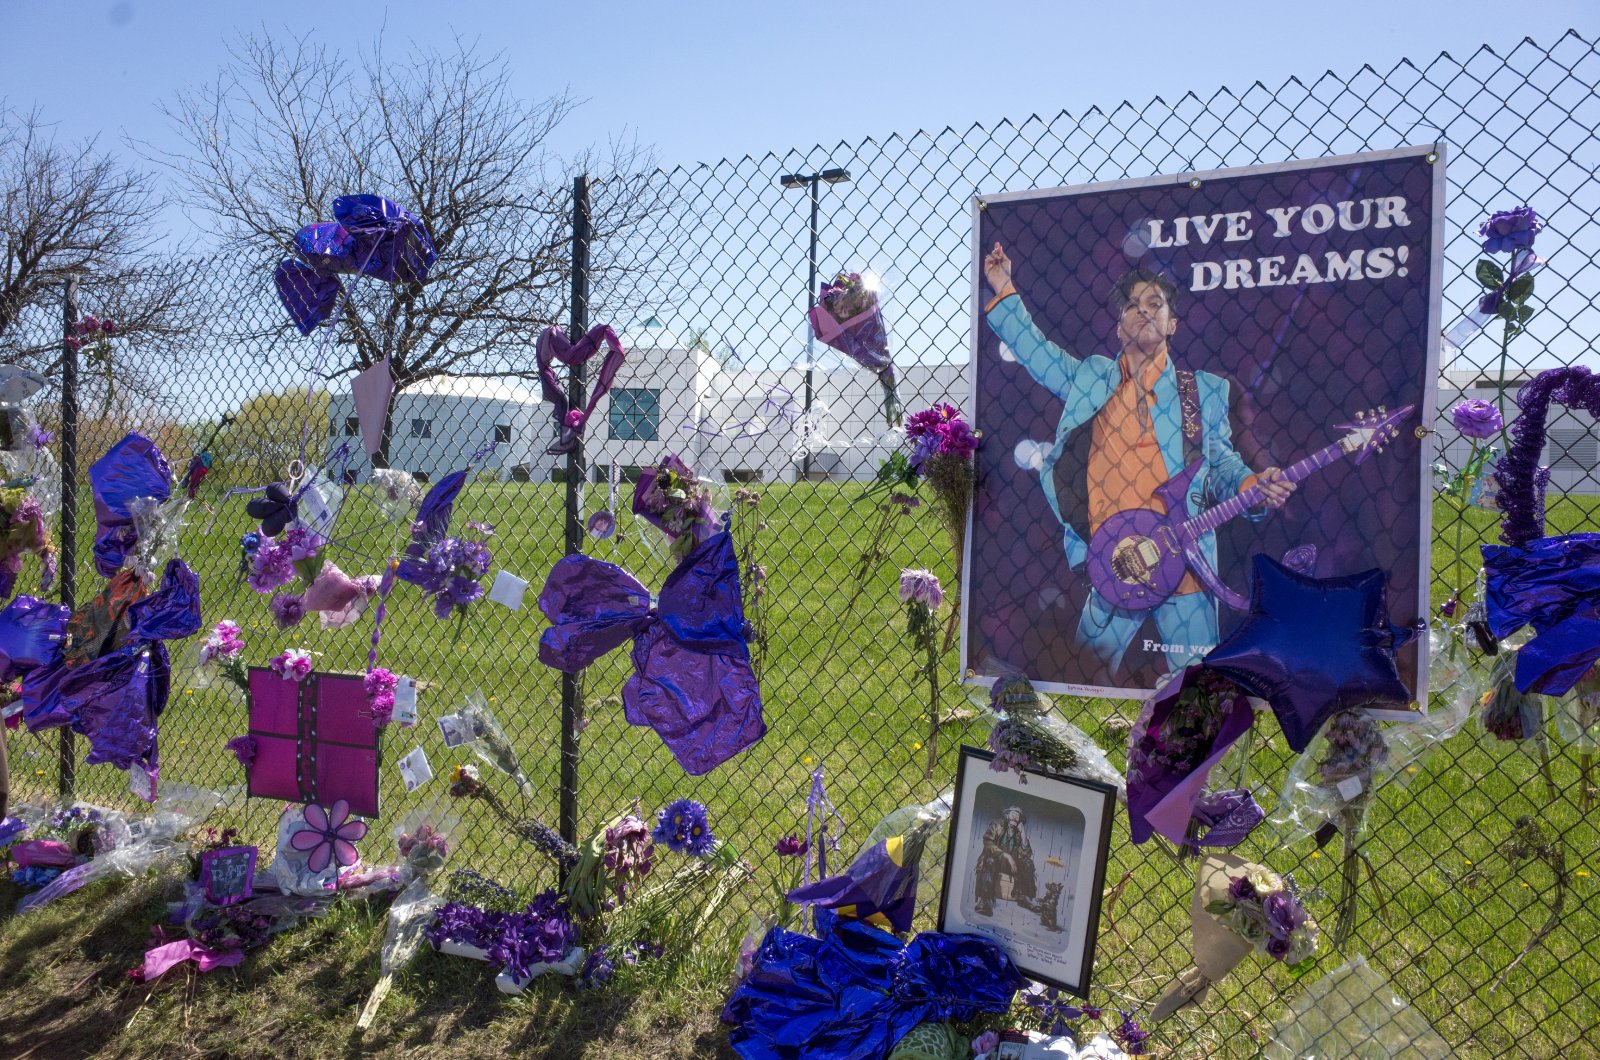 <p class="wp-caption-text">Image Credit: Shutterstock / Steve Skjold</p>  <p><span>Paisley Park was the home and recording studio of the legendary artist Prince. Now open to the public as a museum and memorial, visitors can explore the studios where Prince recorded his most famous songs, see his concert wardrobes, and view his personal archives. Paisley Park offers a unique insight into the creative process of one of music’s most innovative and influential figures.</span></p>